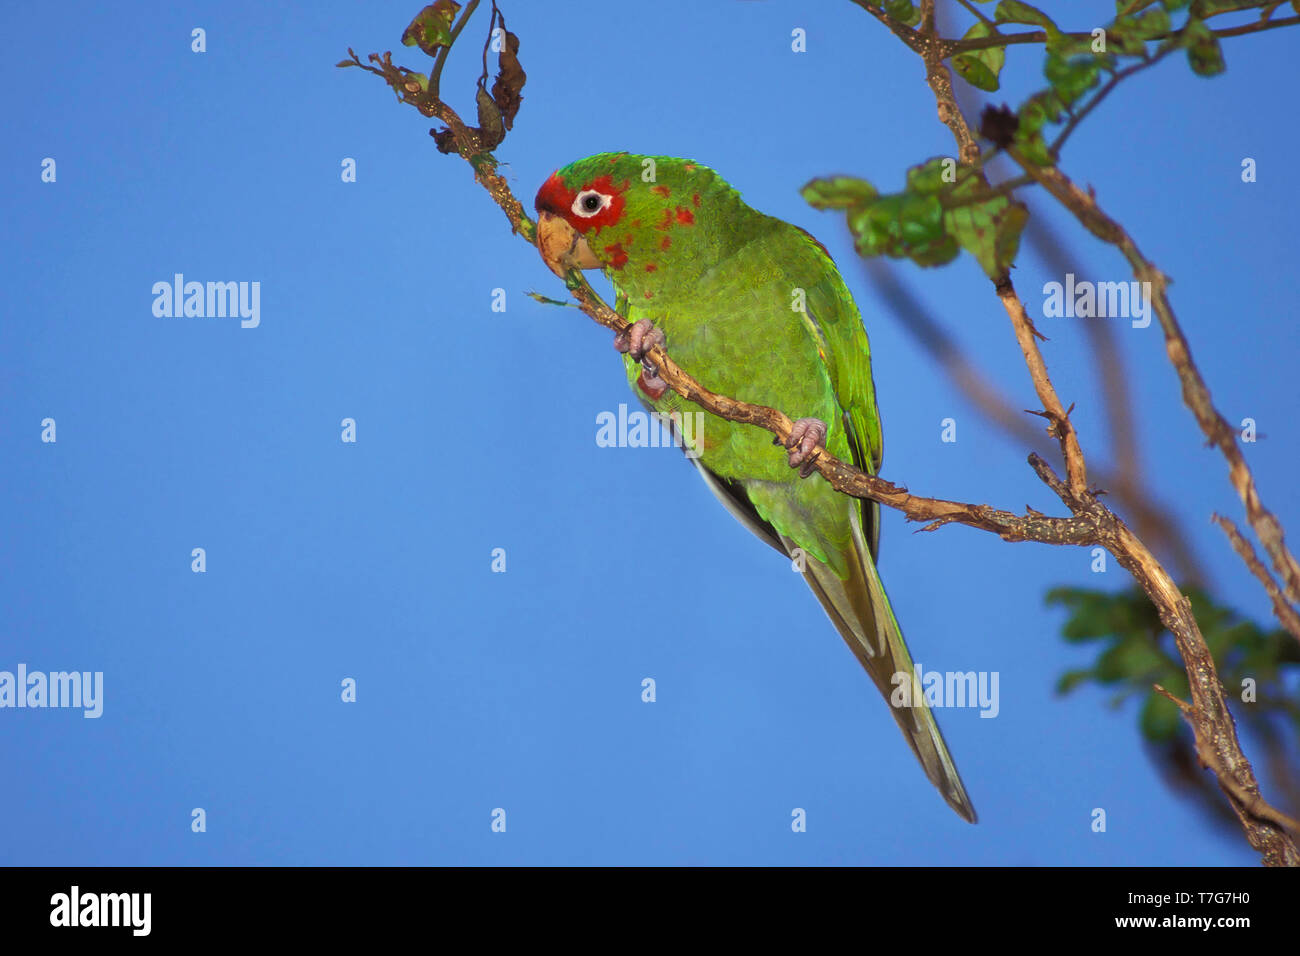 Introduced adult Mitred Parakeet (Psittacara mitratus) perched in a tree in Miami-Dade County, Florida, USA. Stock Photo